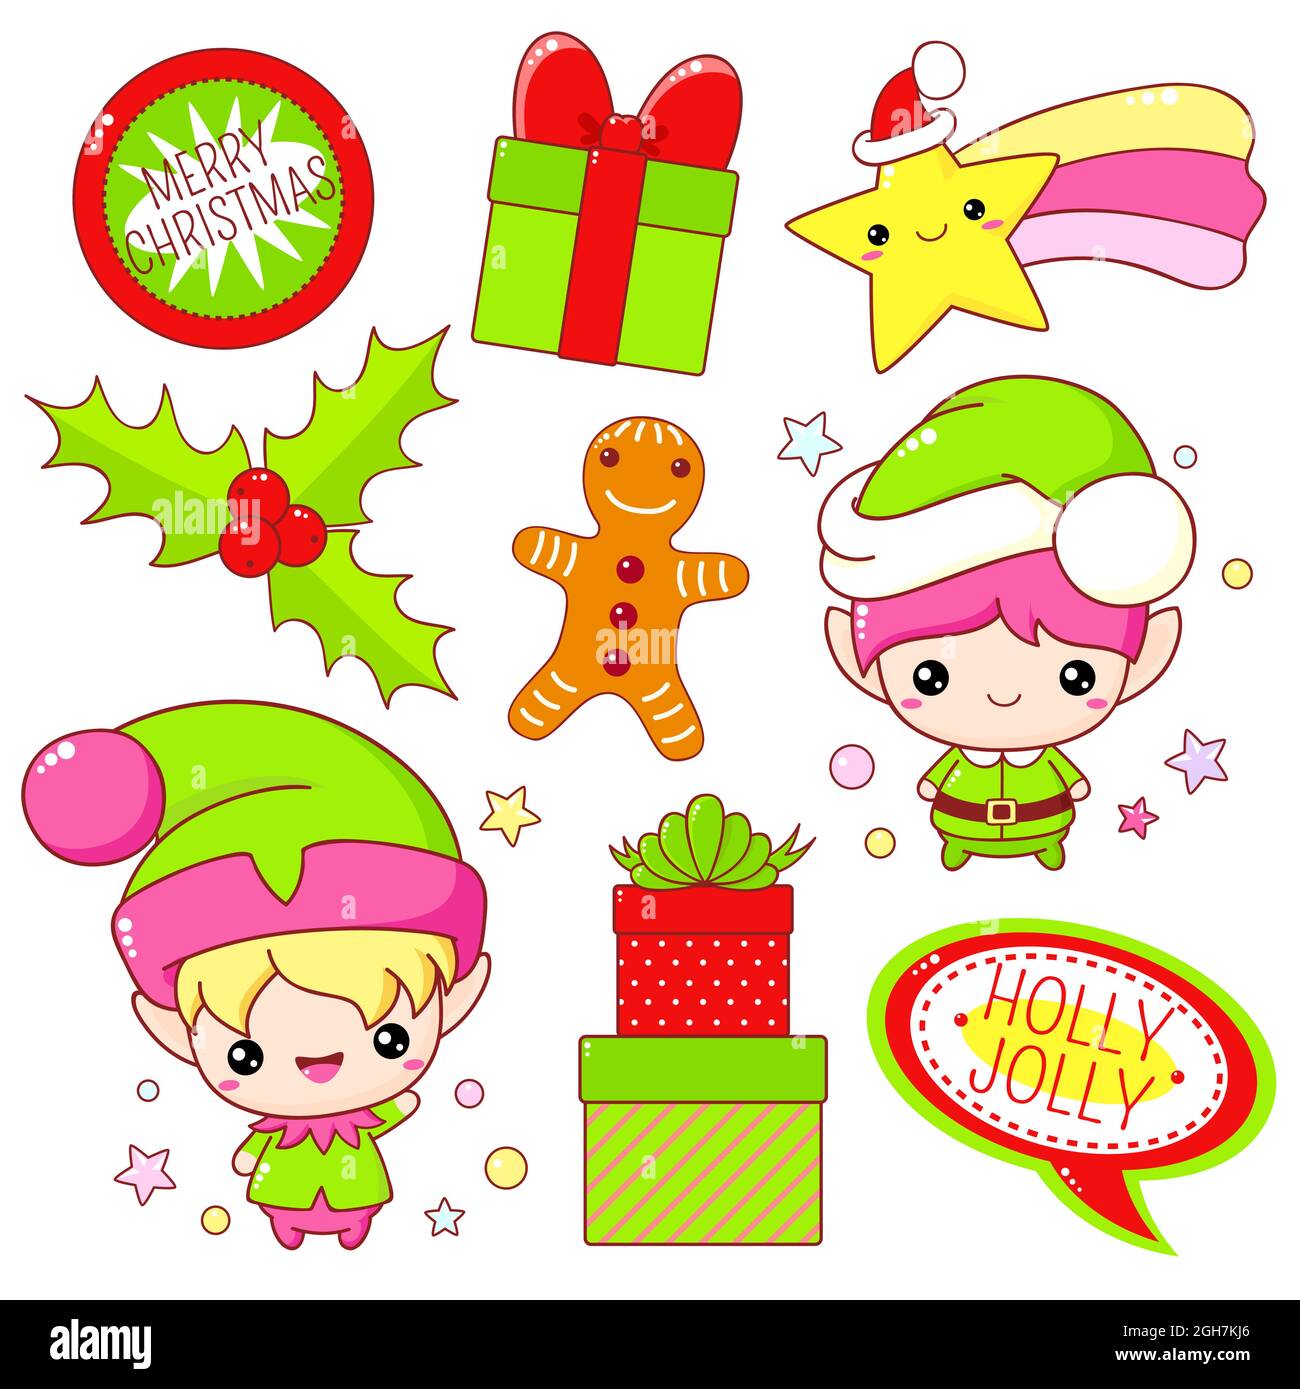 Set of Merry Christmas day icons in kawaii style. Cute elf, gift boxes, falling star in Santa hat, gingerbread. Vector illustration EPS 8 Stock Vector